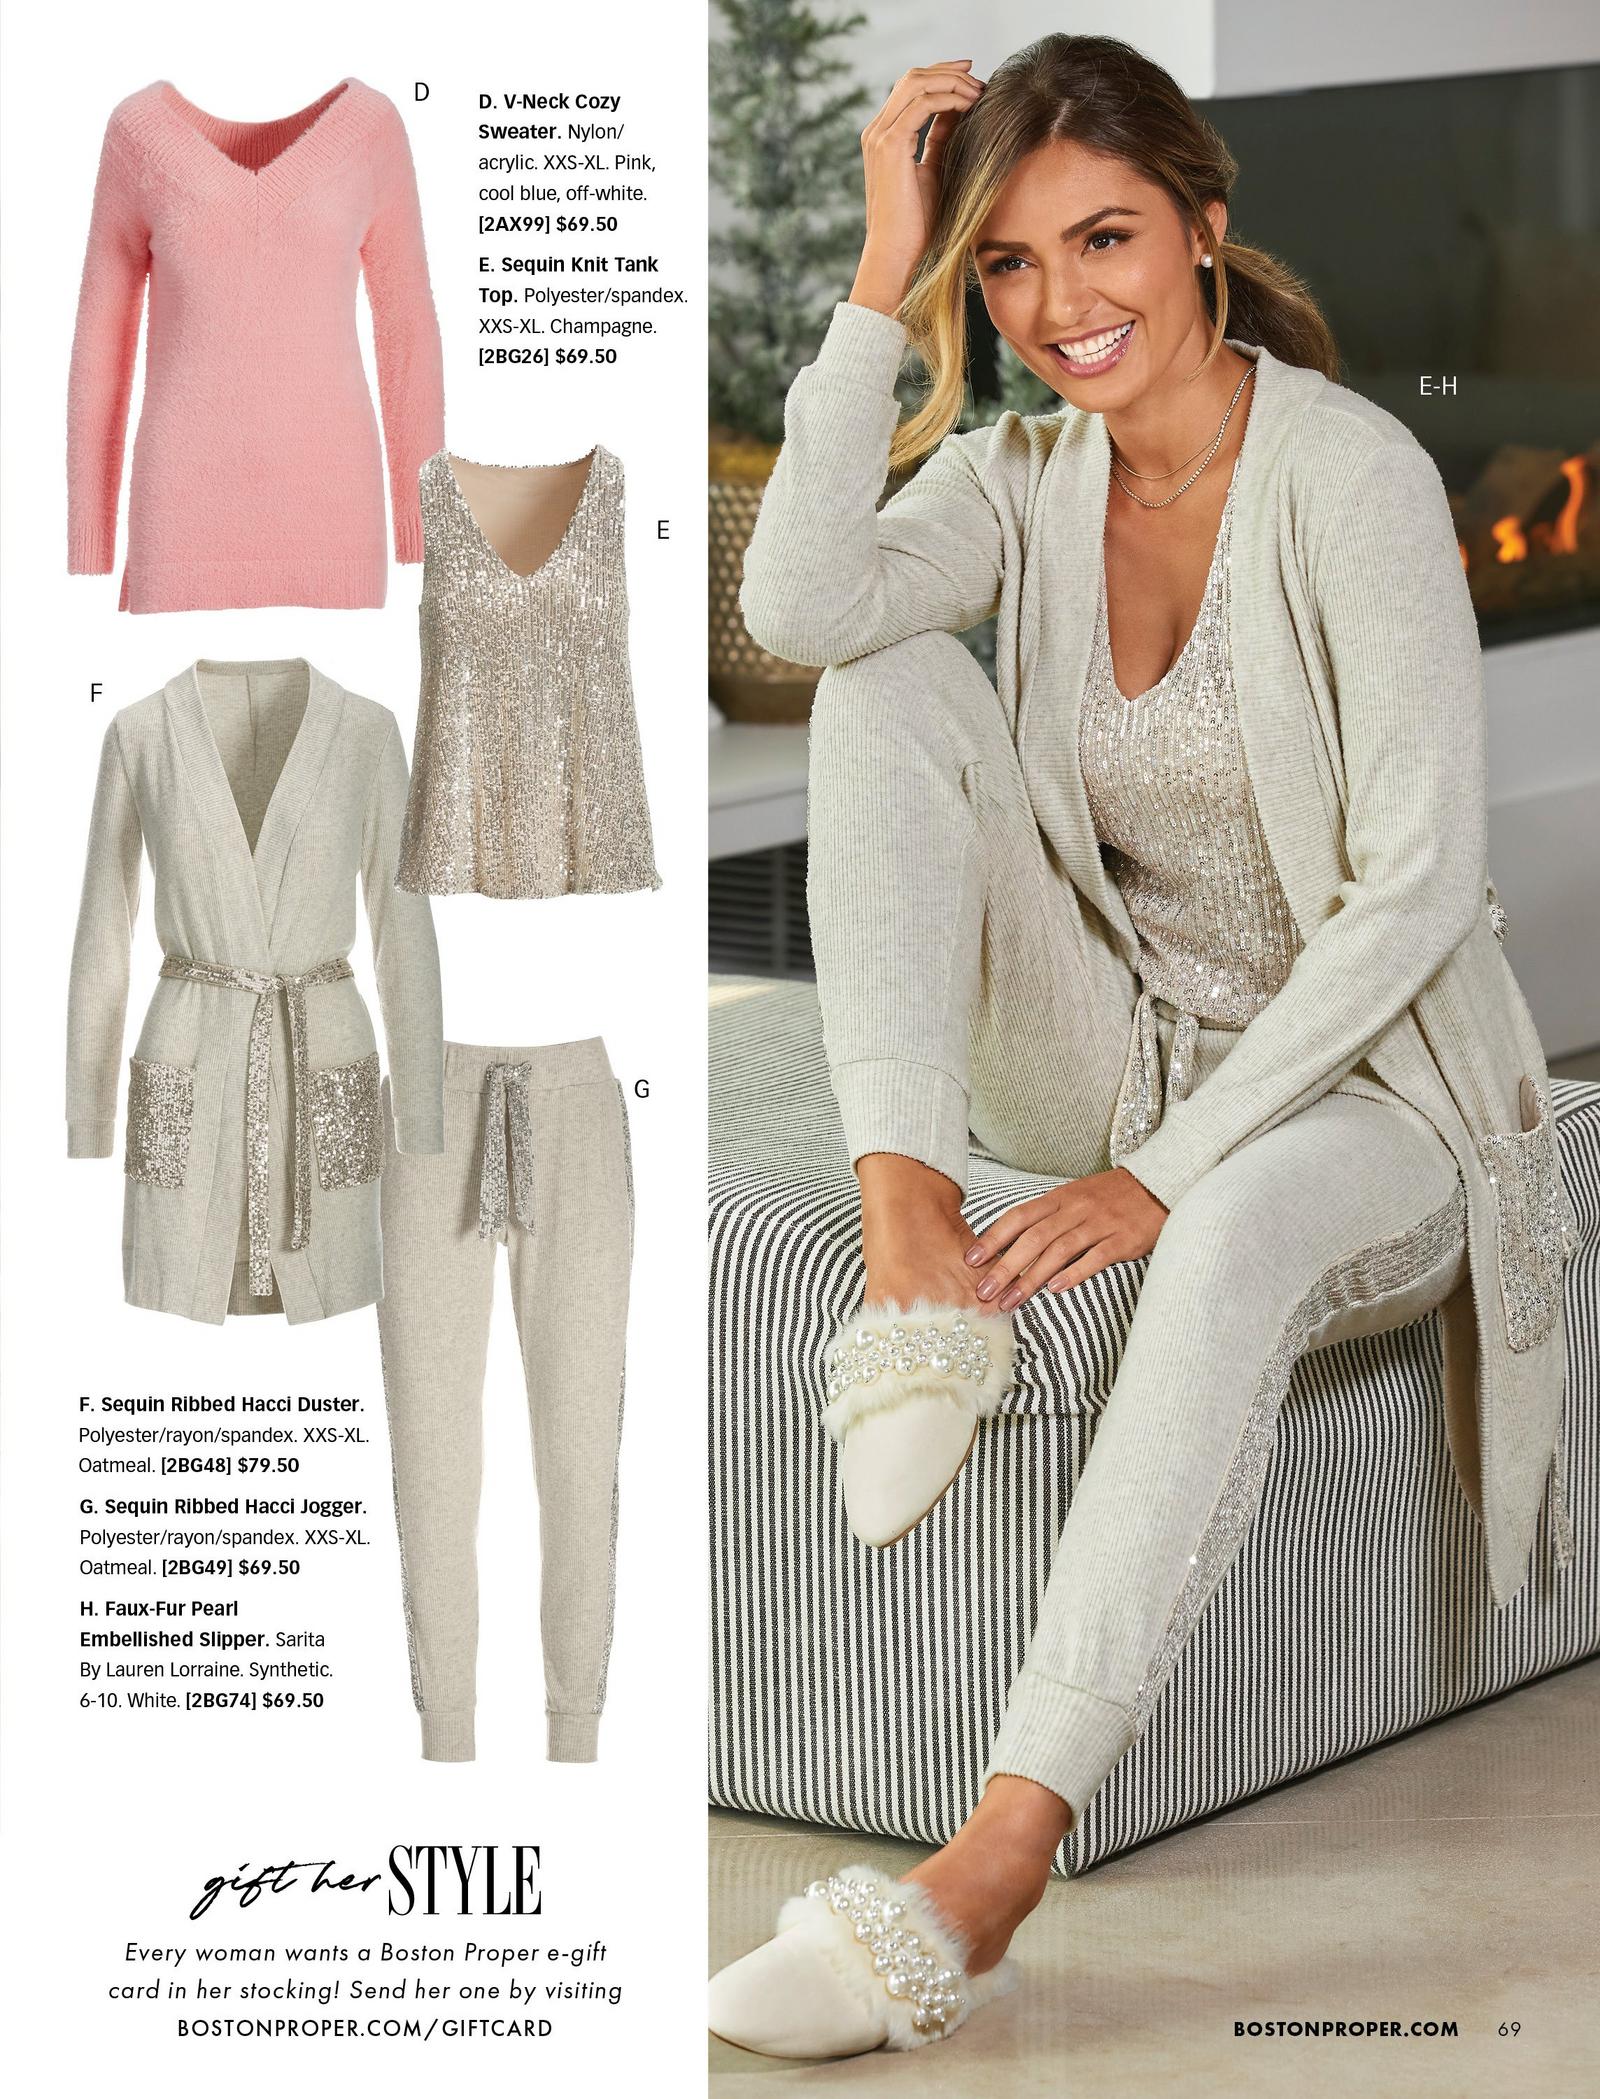 left panel shows a pink v-neck sweater, sequin tank top, sequin embellished robe, and sequin embellished joggers. right panel shows model wearing a sequin robe, sequin tank top, sequin embellished joggers, and pearl embellished white faux-fur slippers.